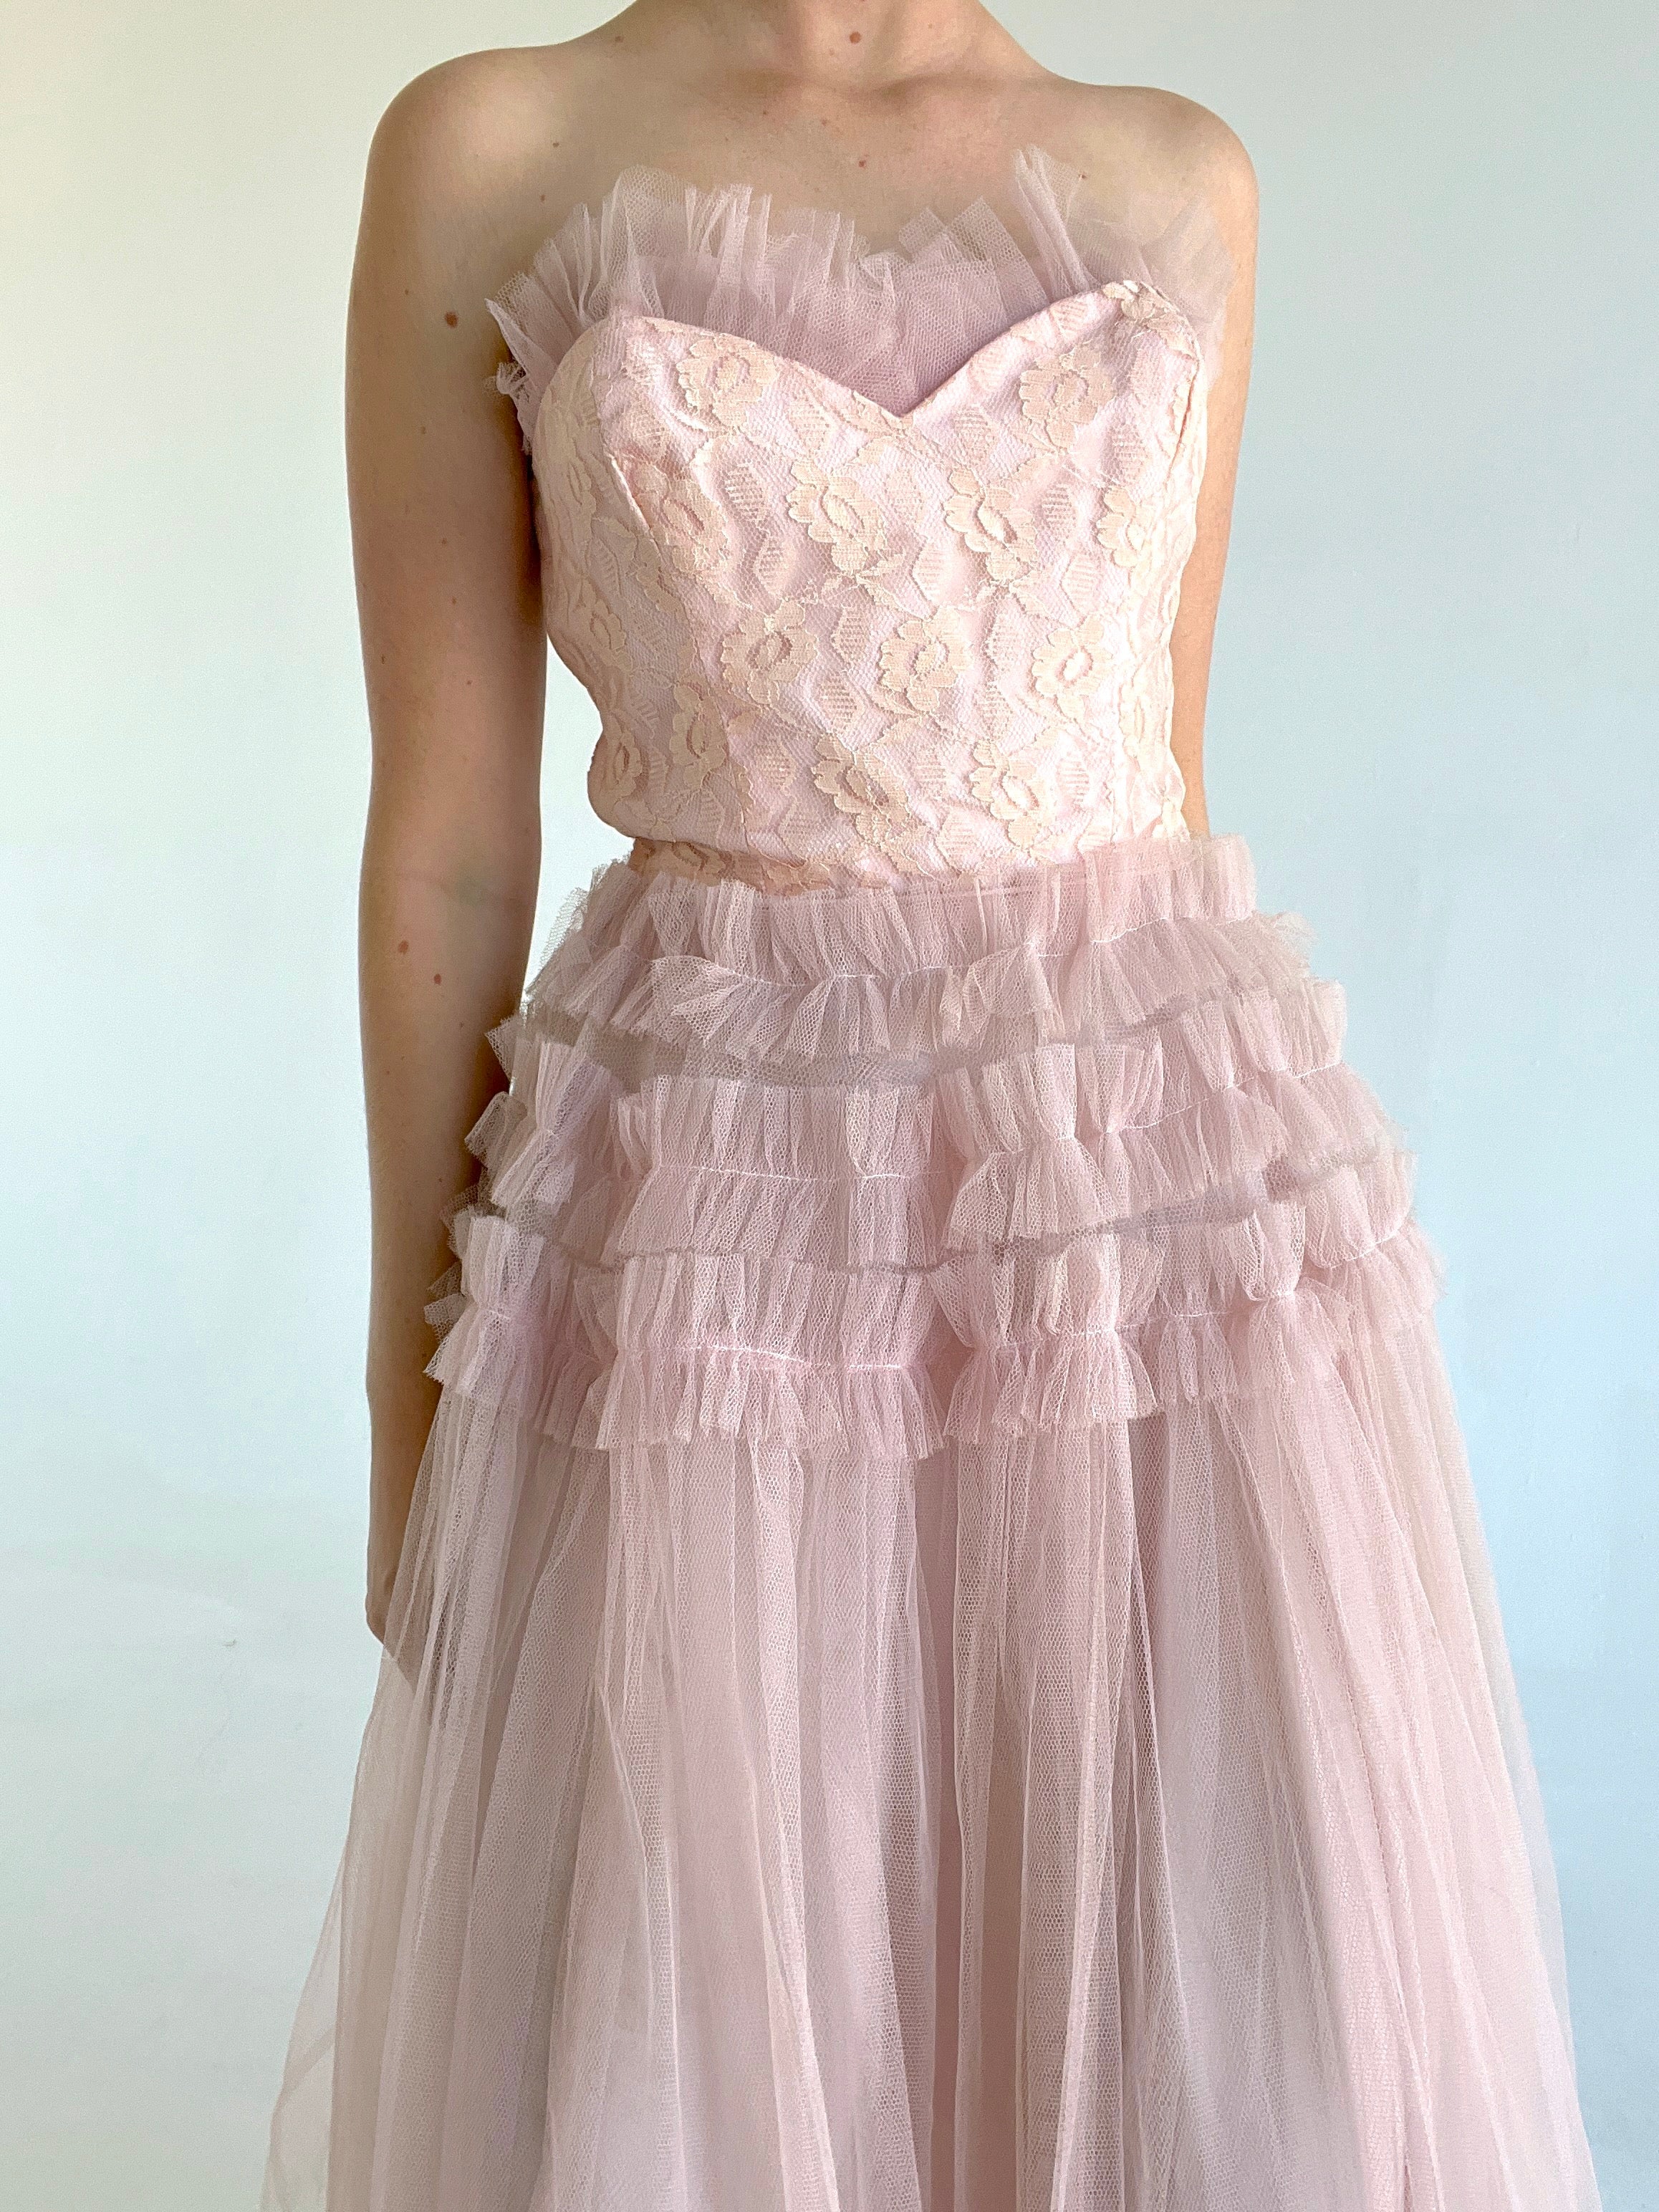 1950's Pink Tulle Strapless Party Dress